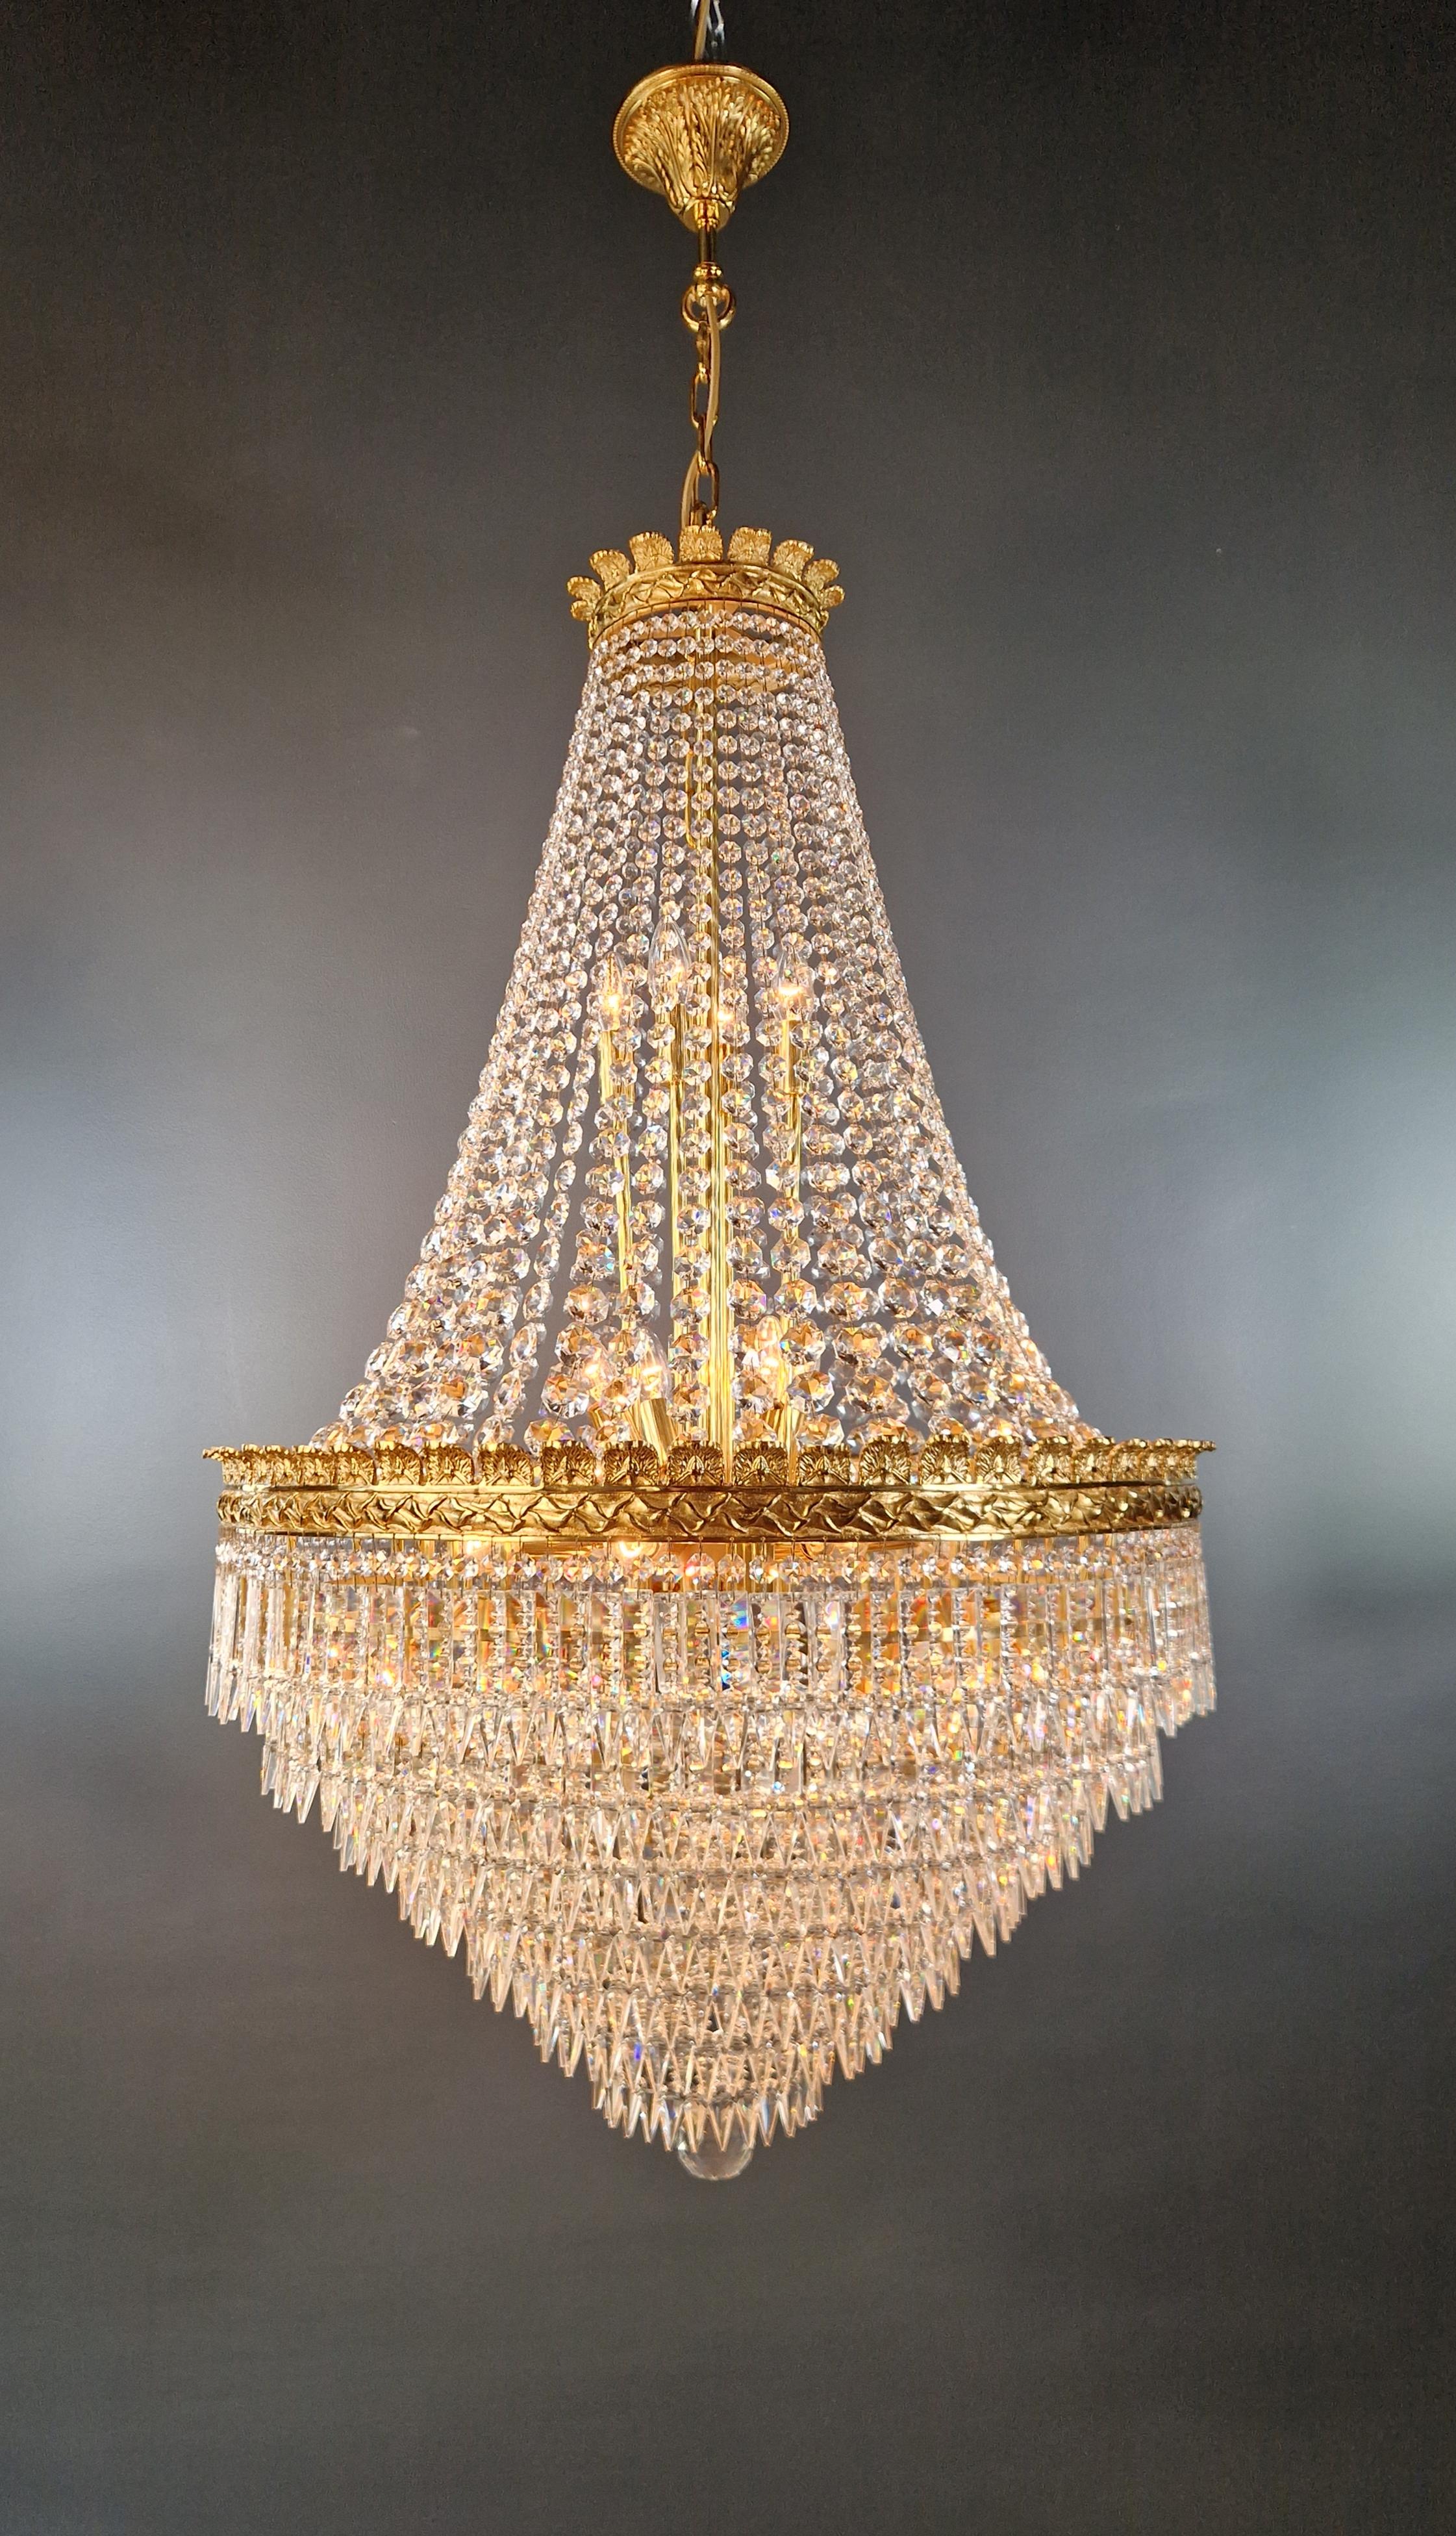 European Brass Basket Empire Sac a Pearl Chandelier Crystal Lustre Lamp Antique Gold For Sale